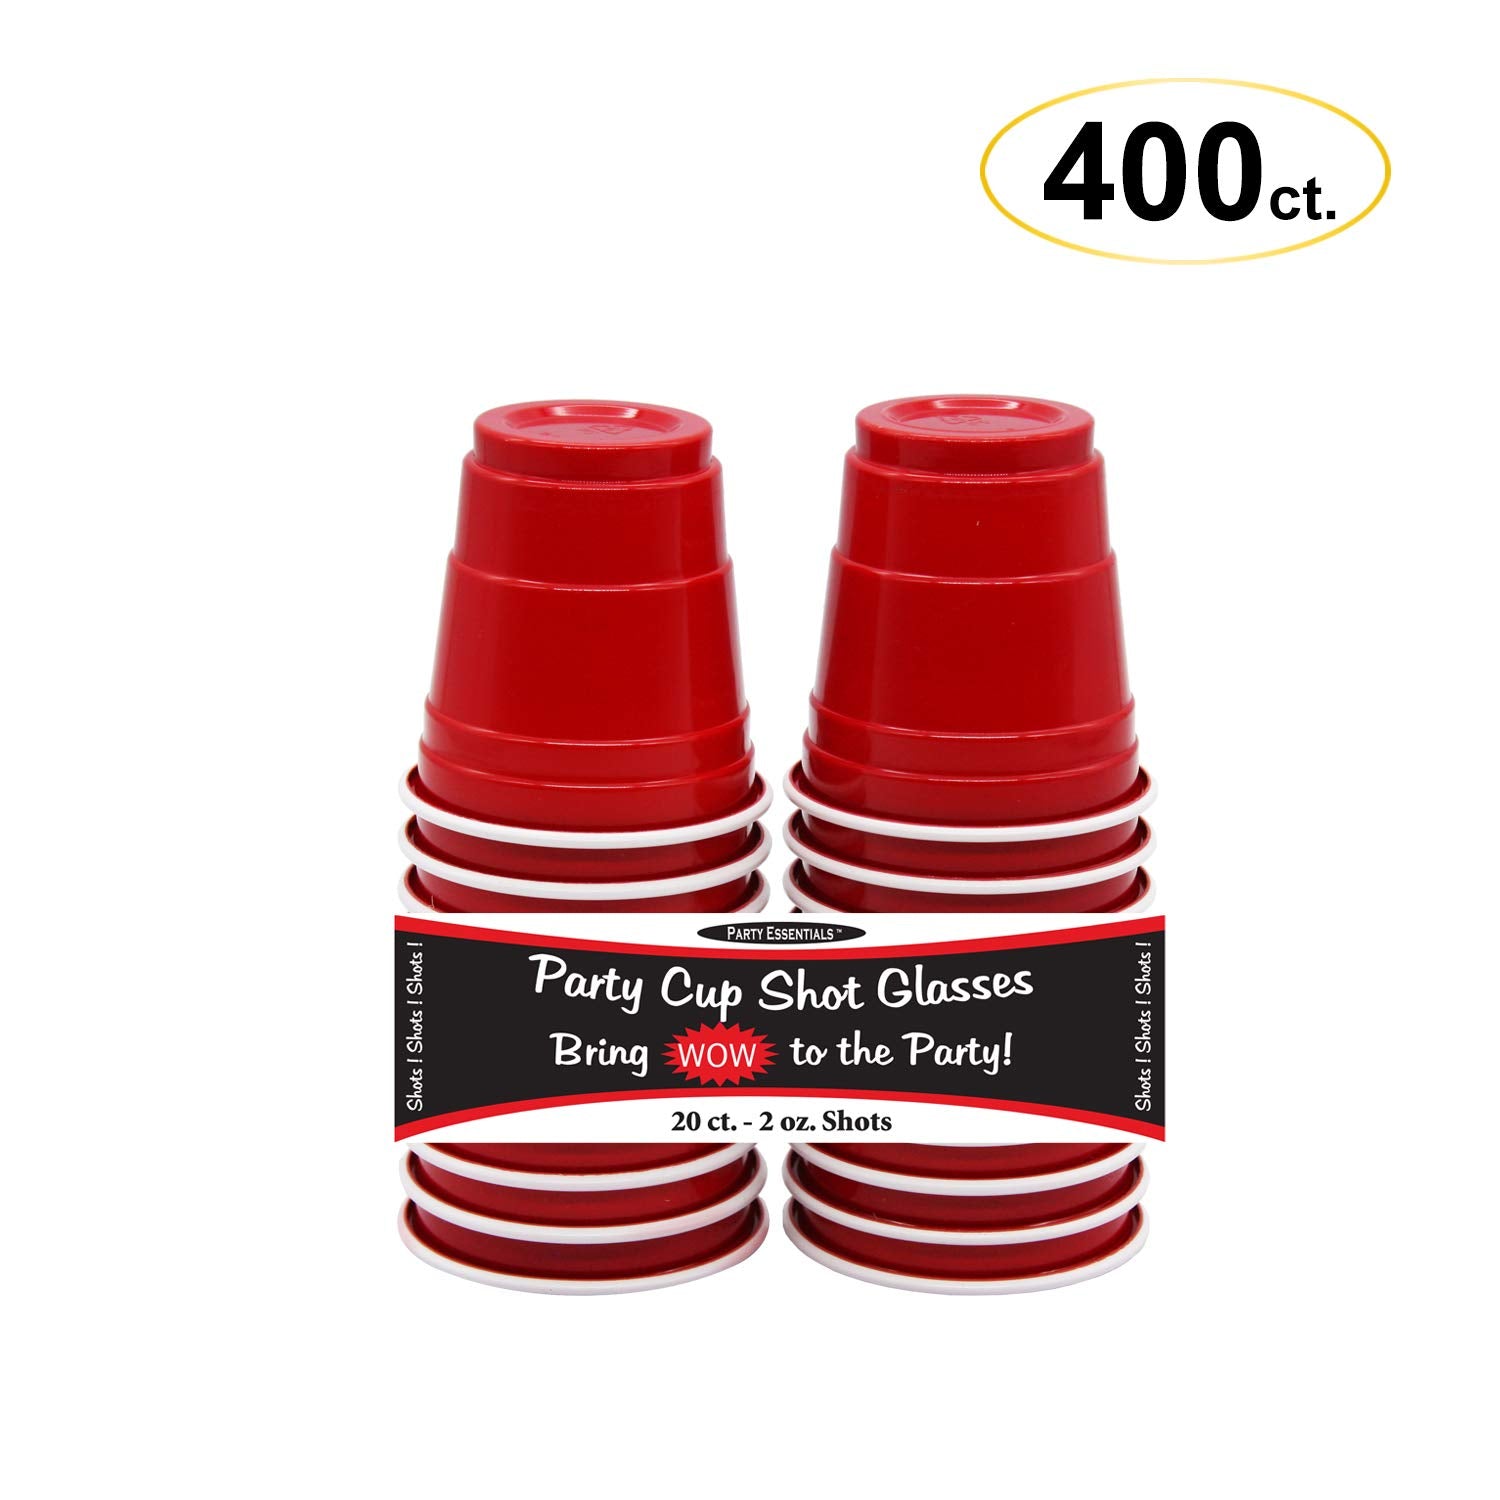 Poly Party Cup Counter Display 24ct